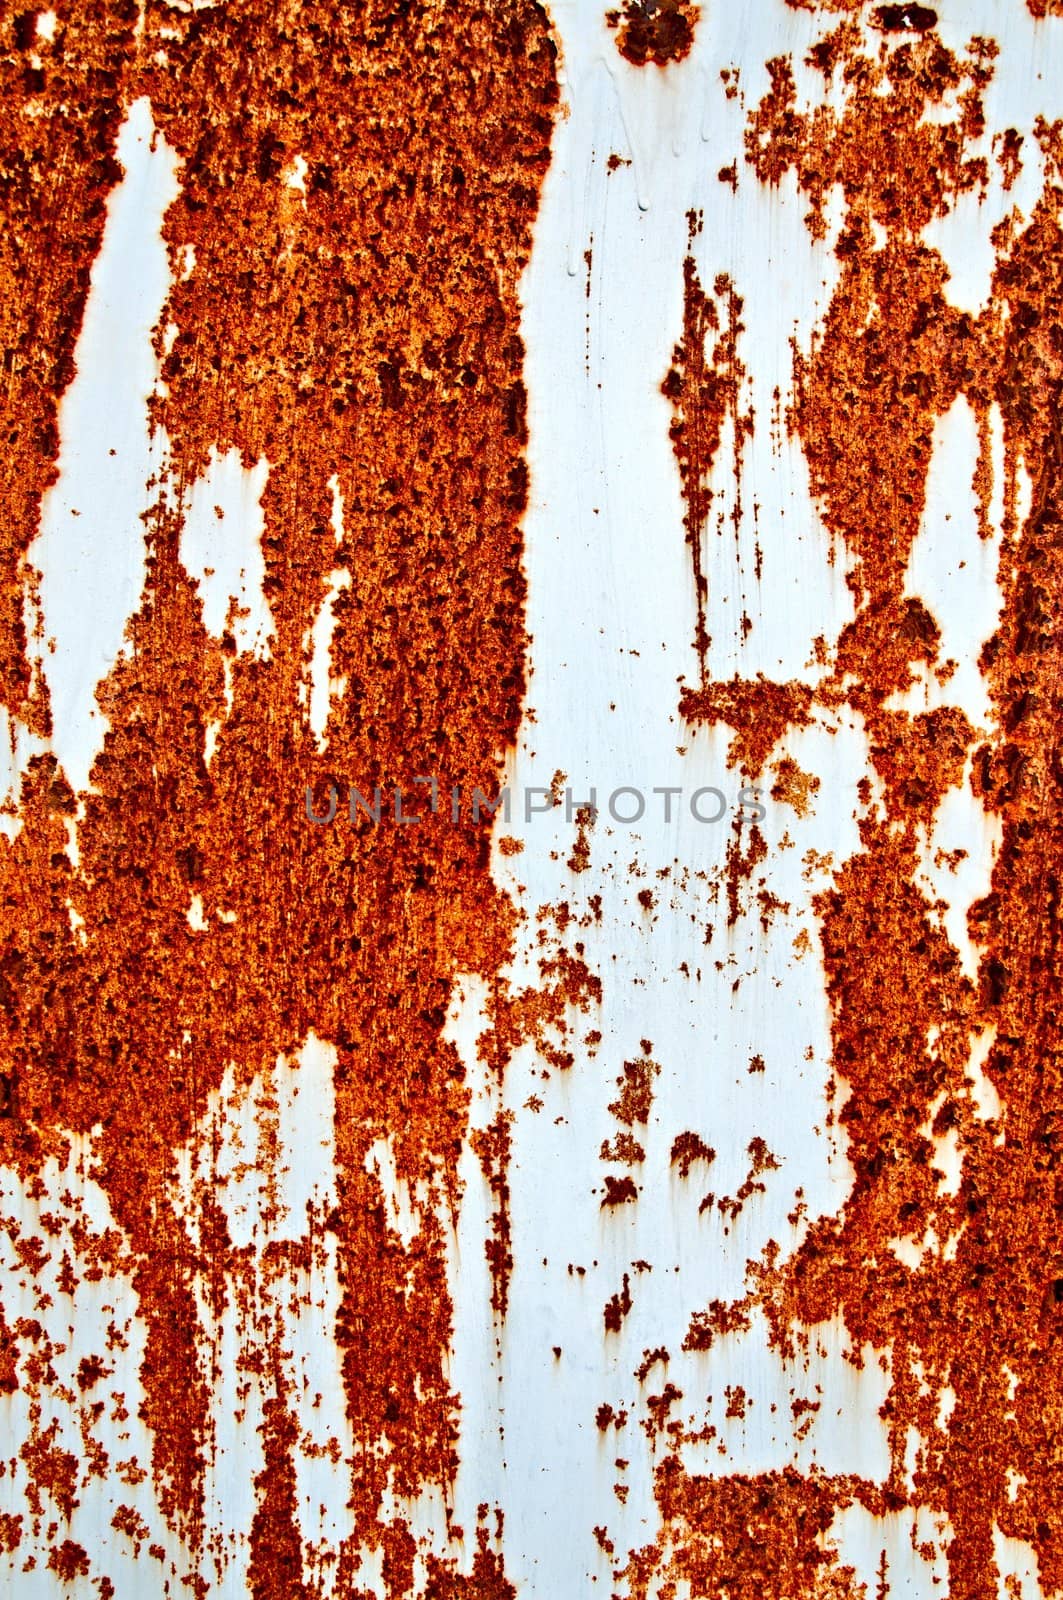 Grunge background - old metal painted rusty sheet.